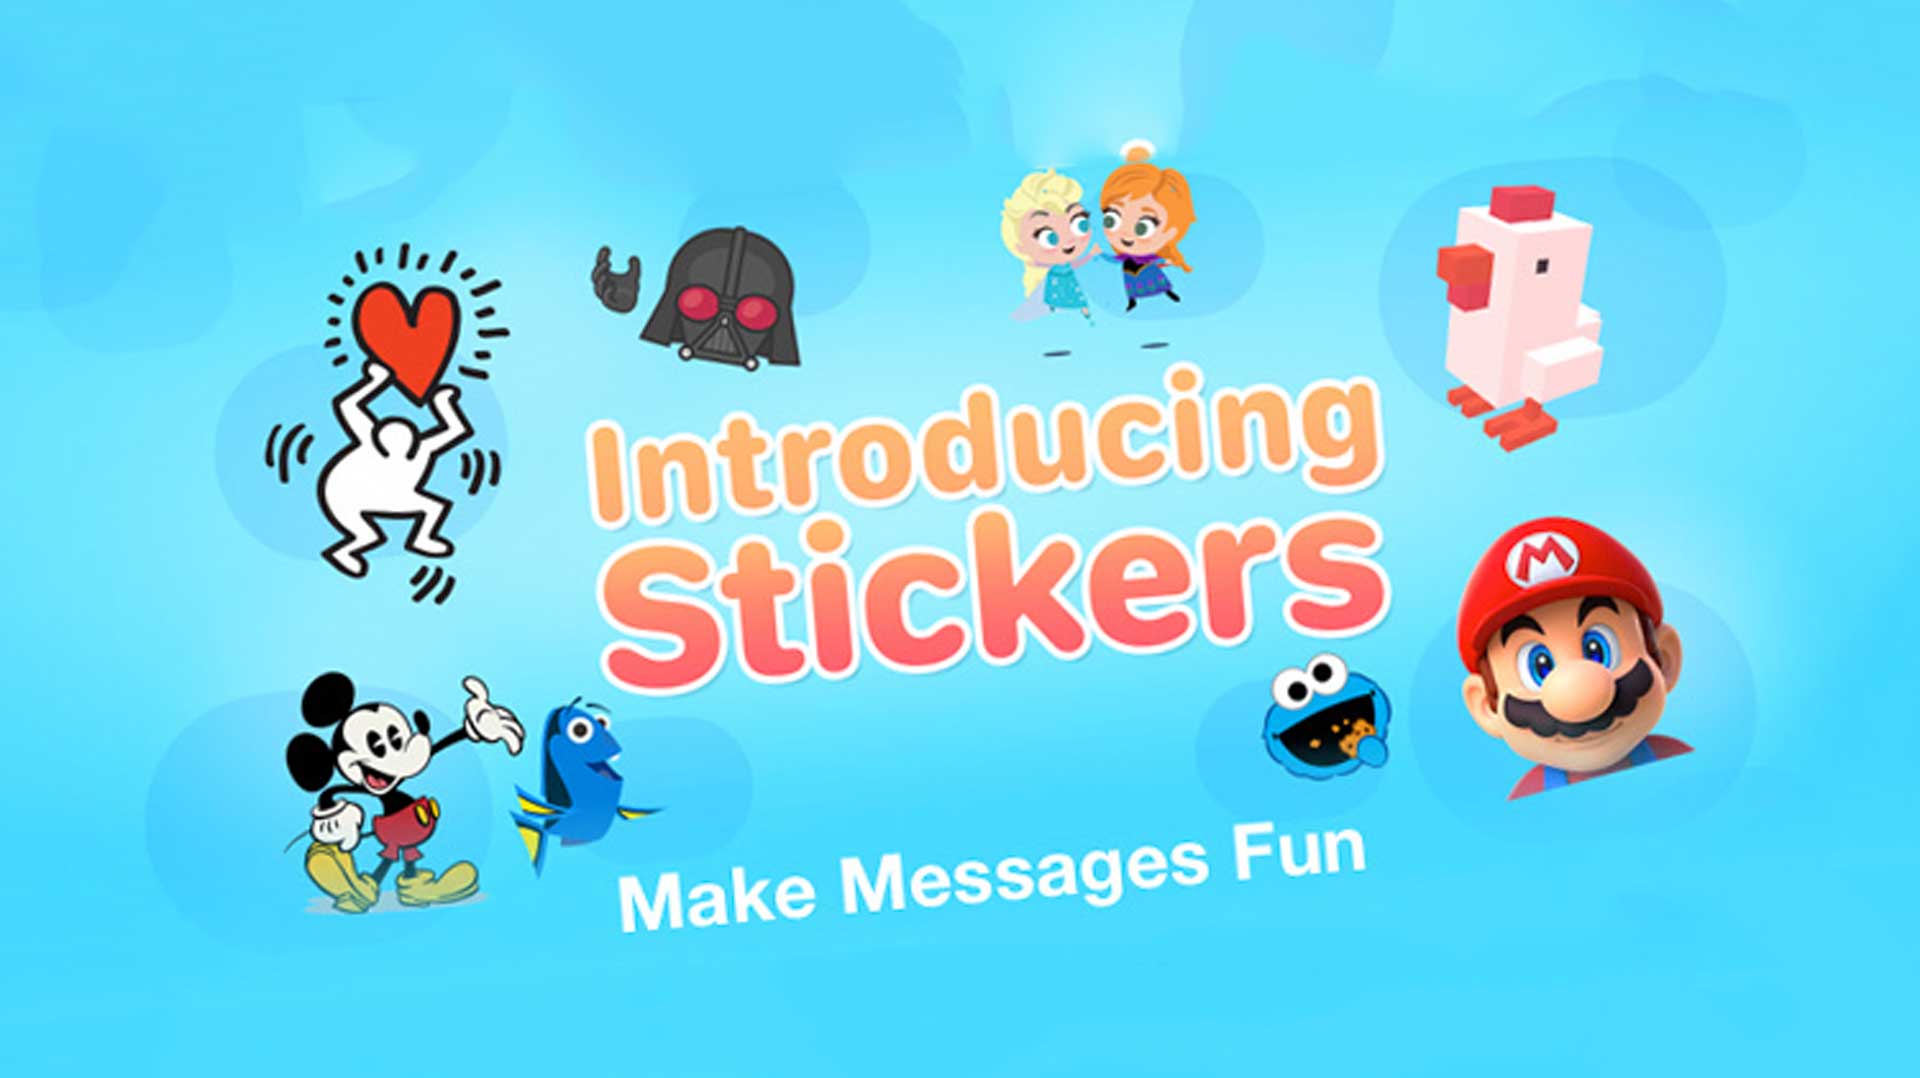 Cartoon Sticker for iOS & Android